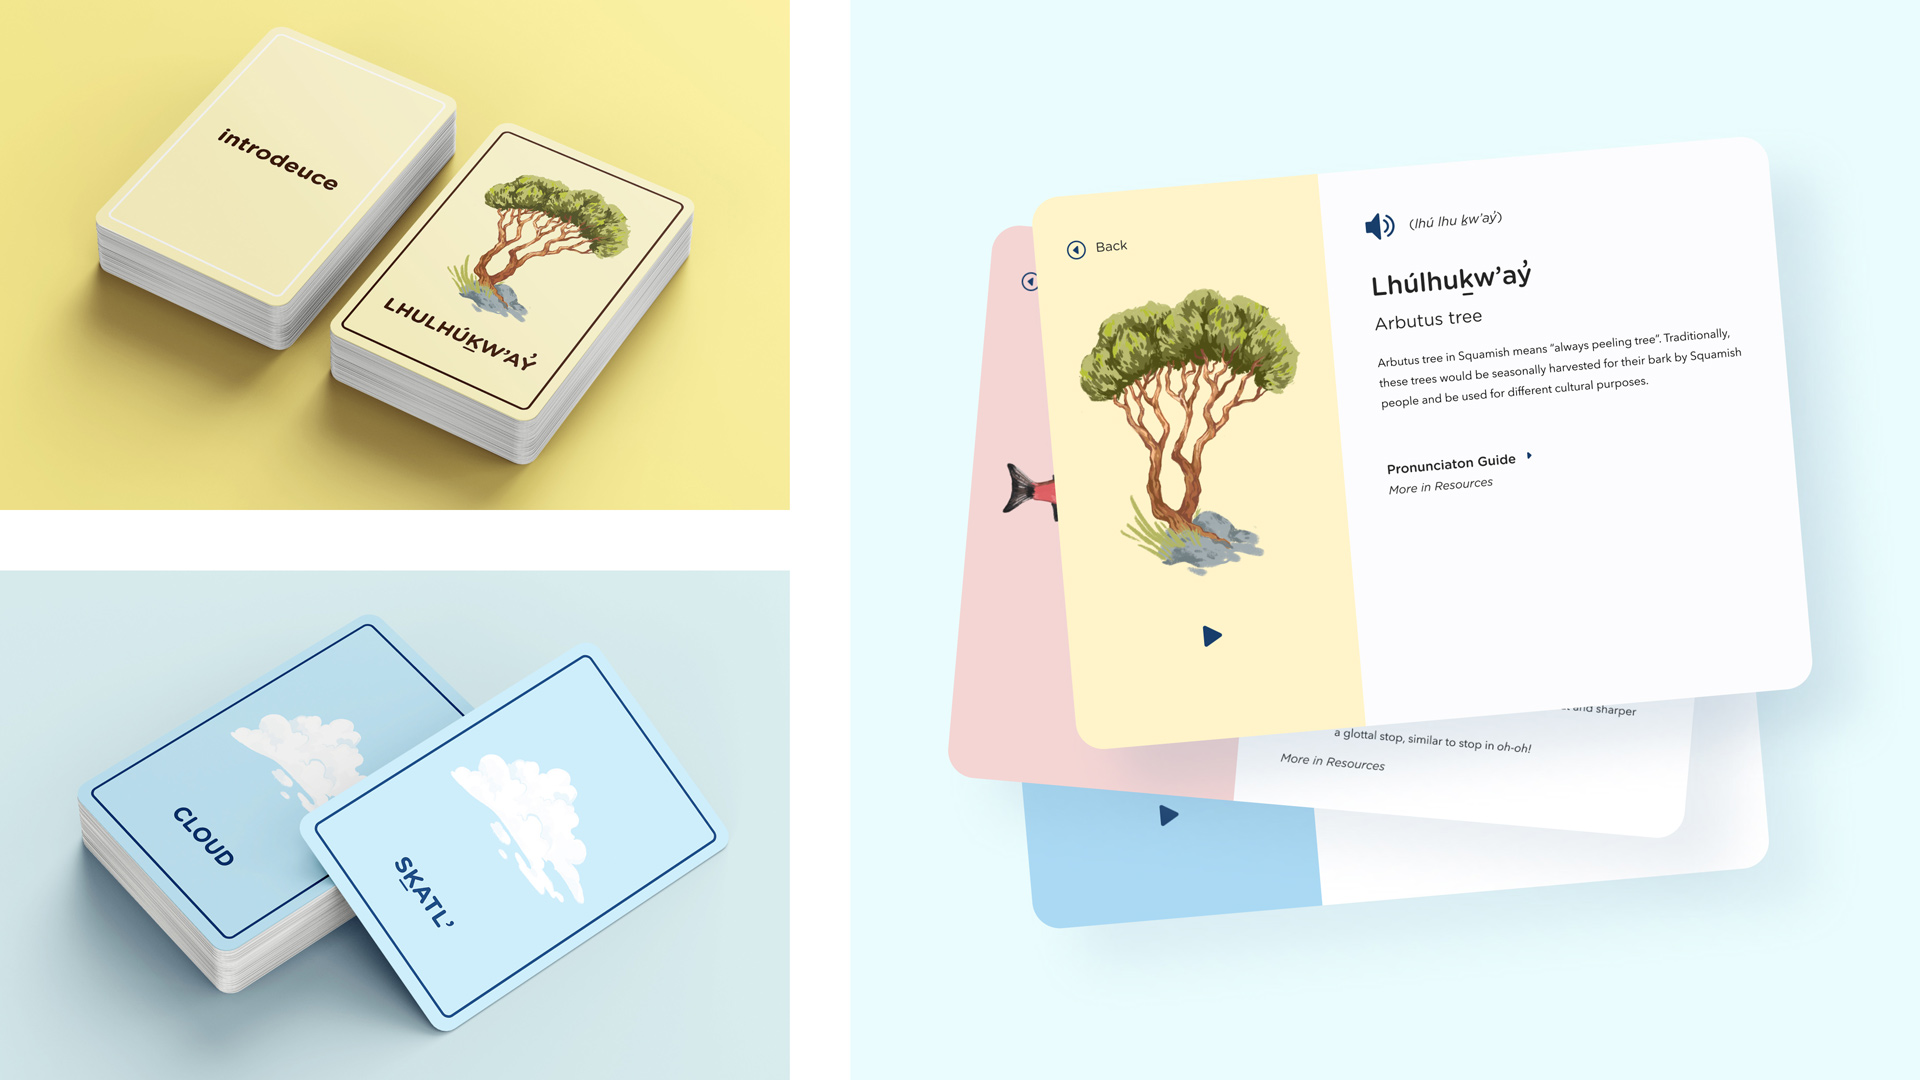 Memory card mockups of Introdeuce, a Squamish vocabulary game that helps students deepen their understanding of Squamish culture.